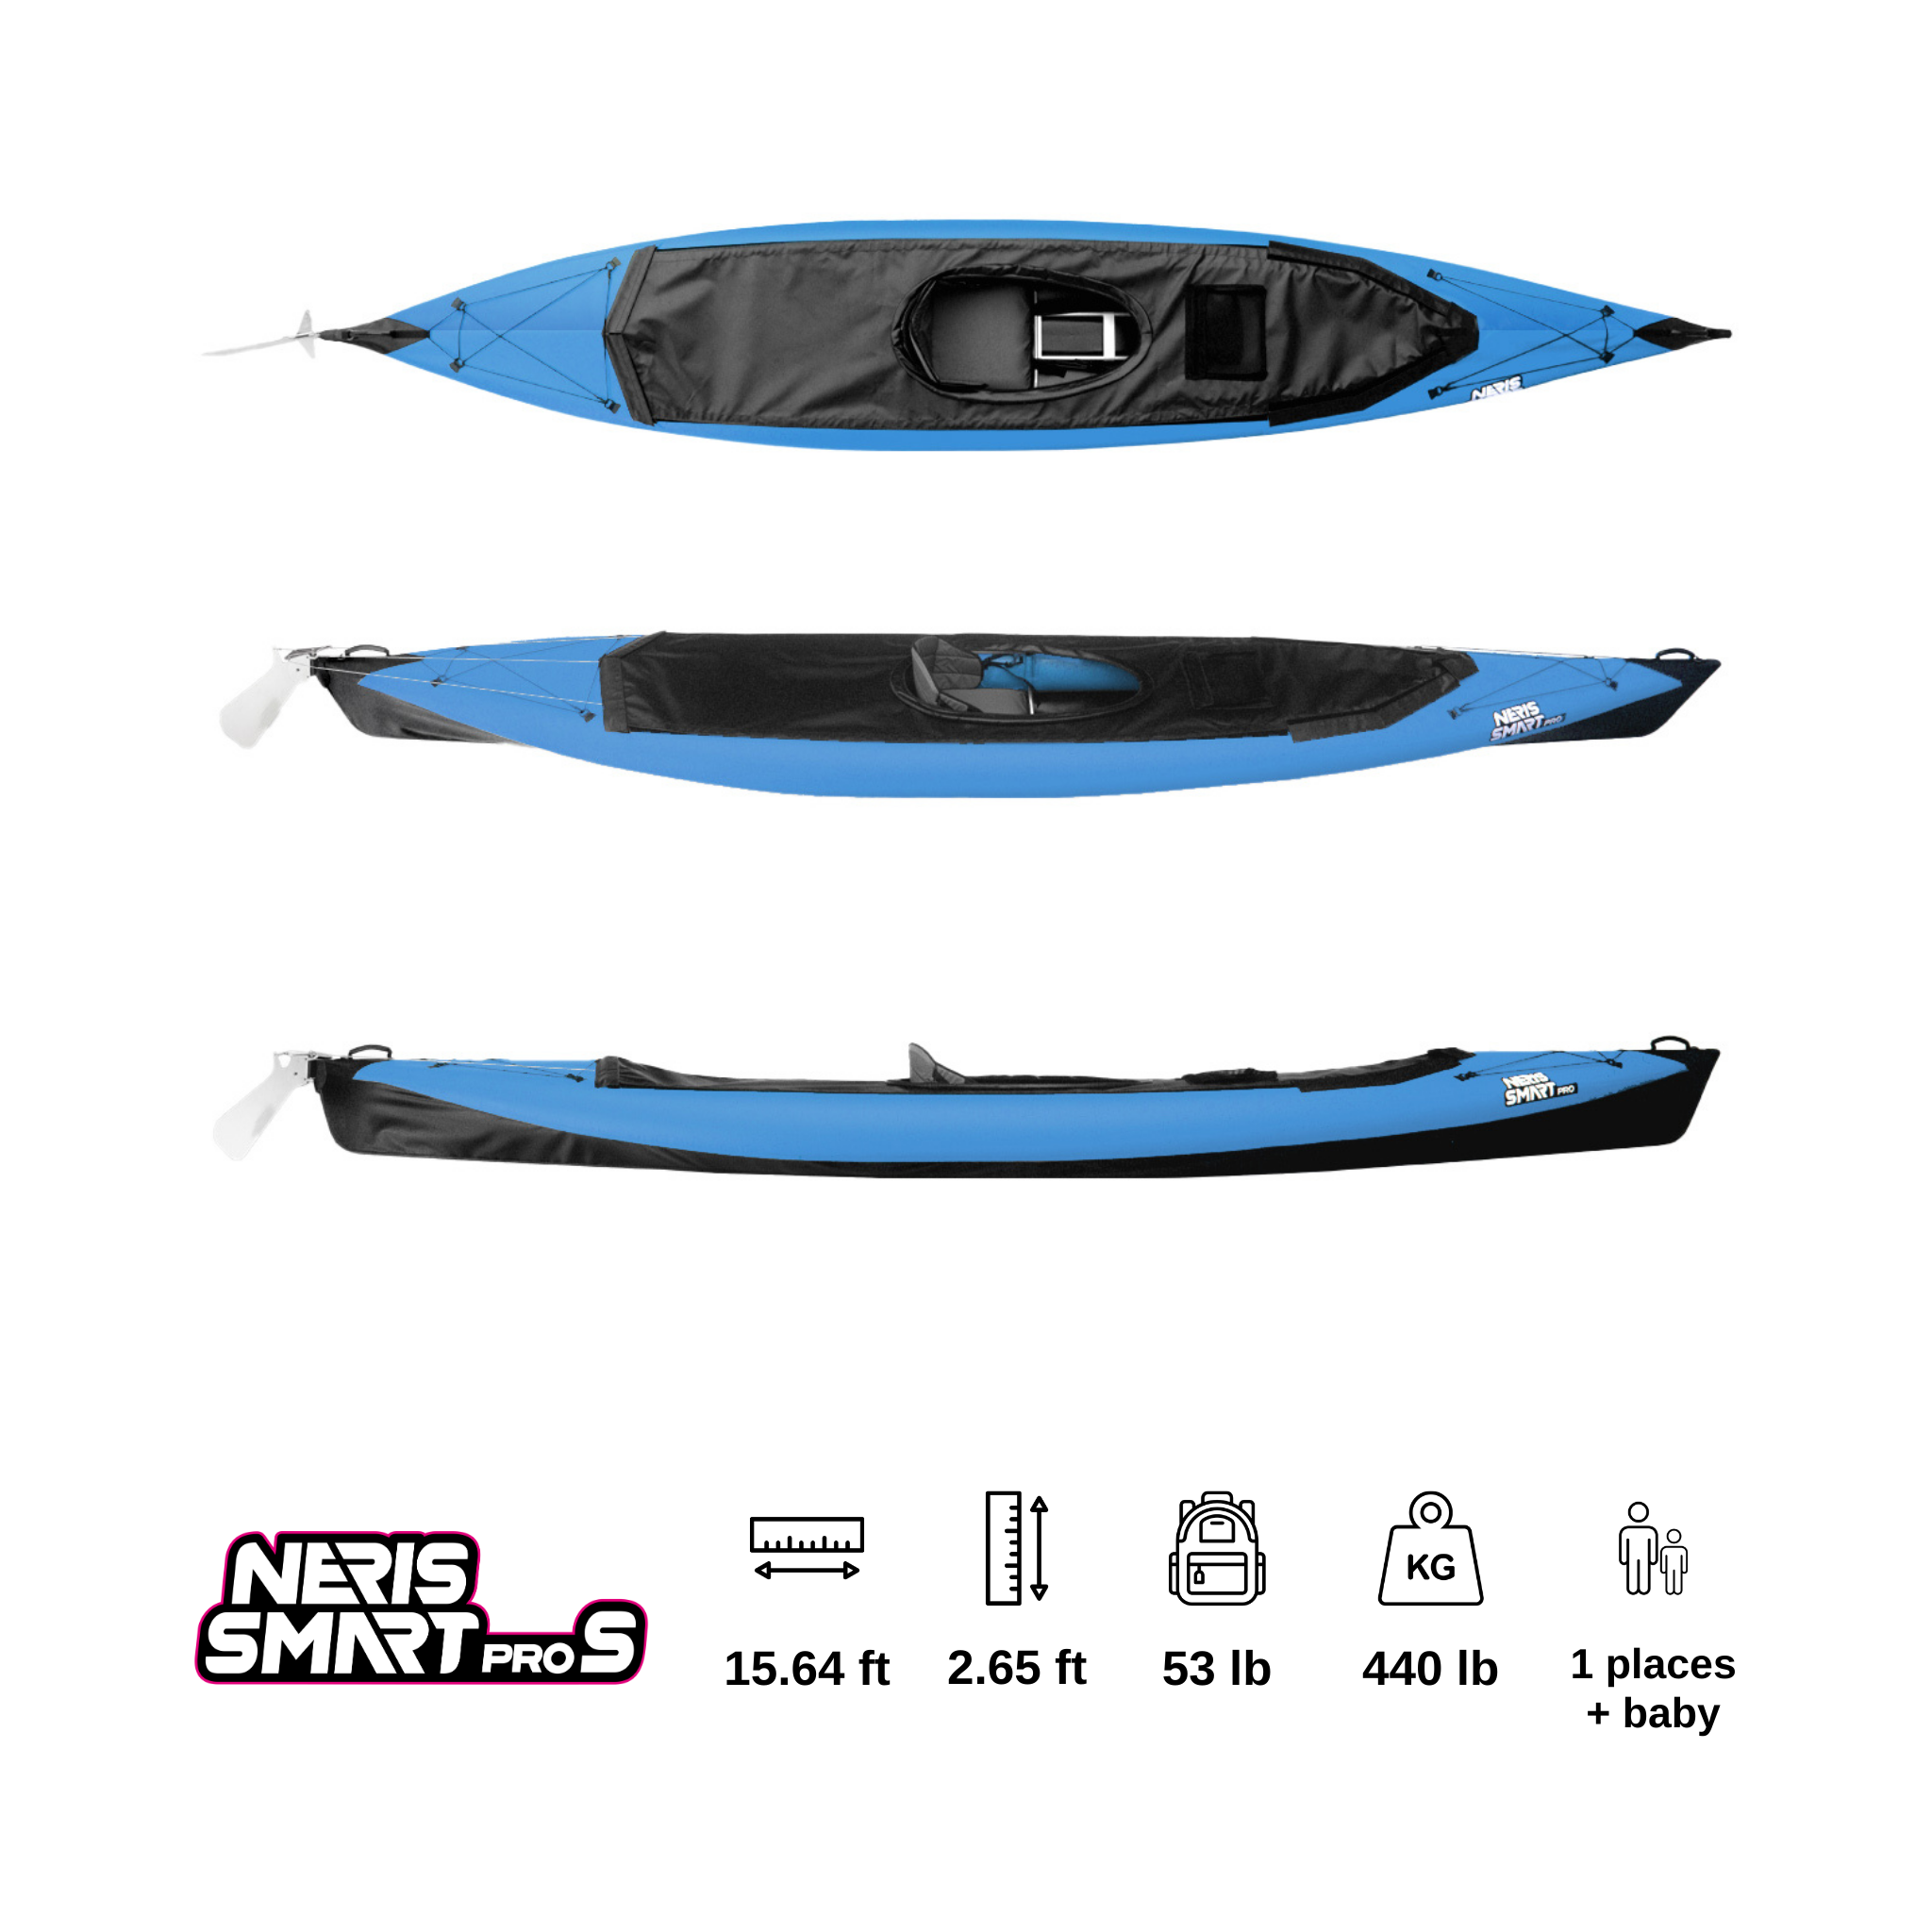 A NERIS Smart Pro folding kayak for one person, outfitted with a blue top, offering a seamless blend of functionality and design for solo expeditions